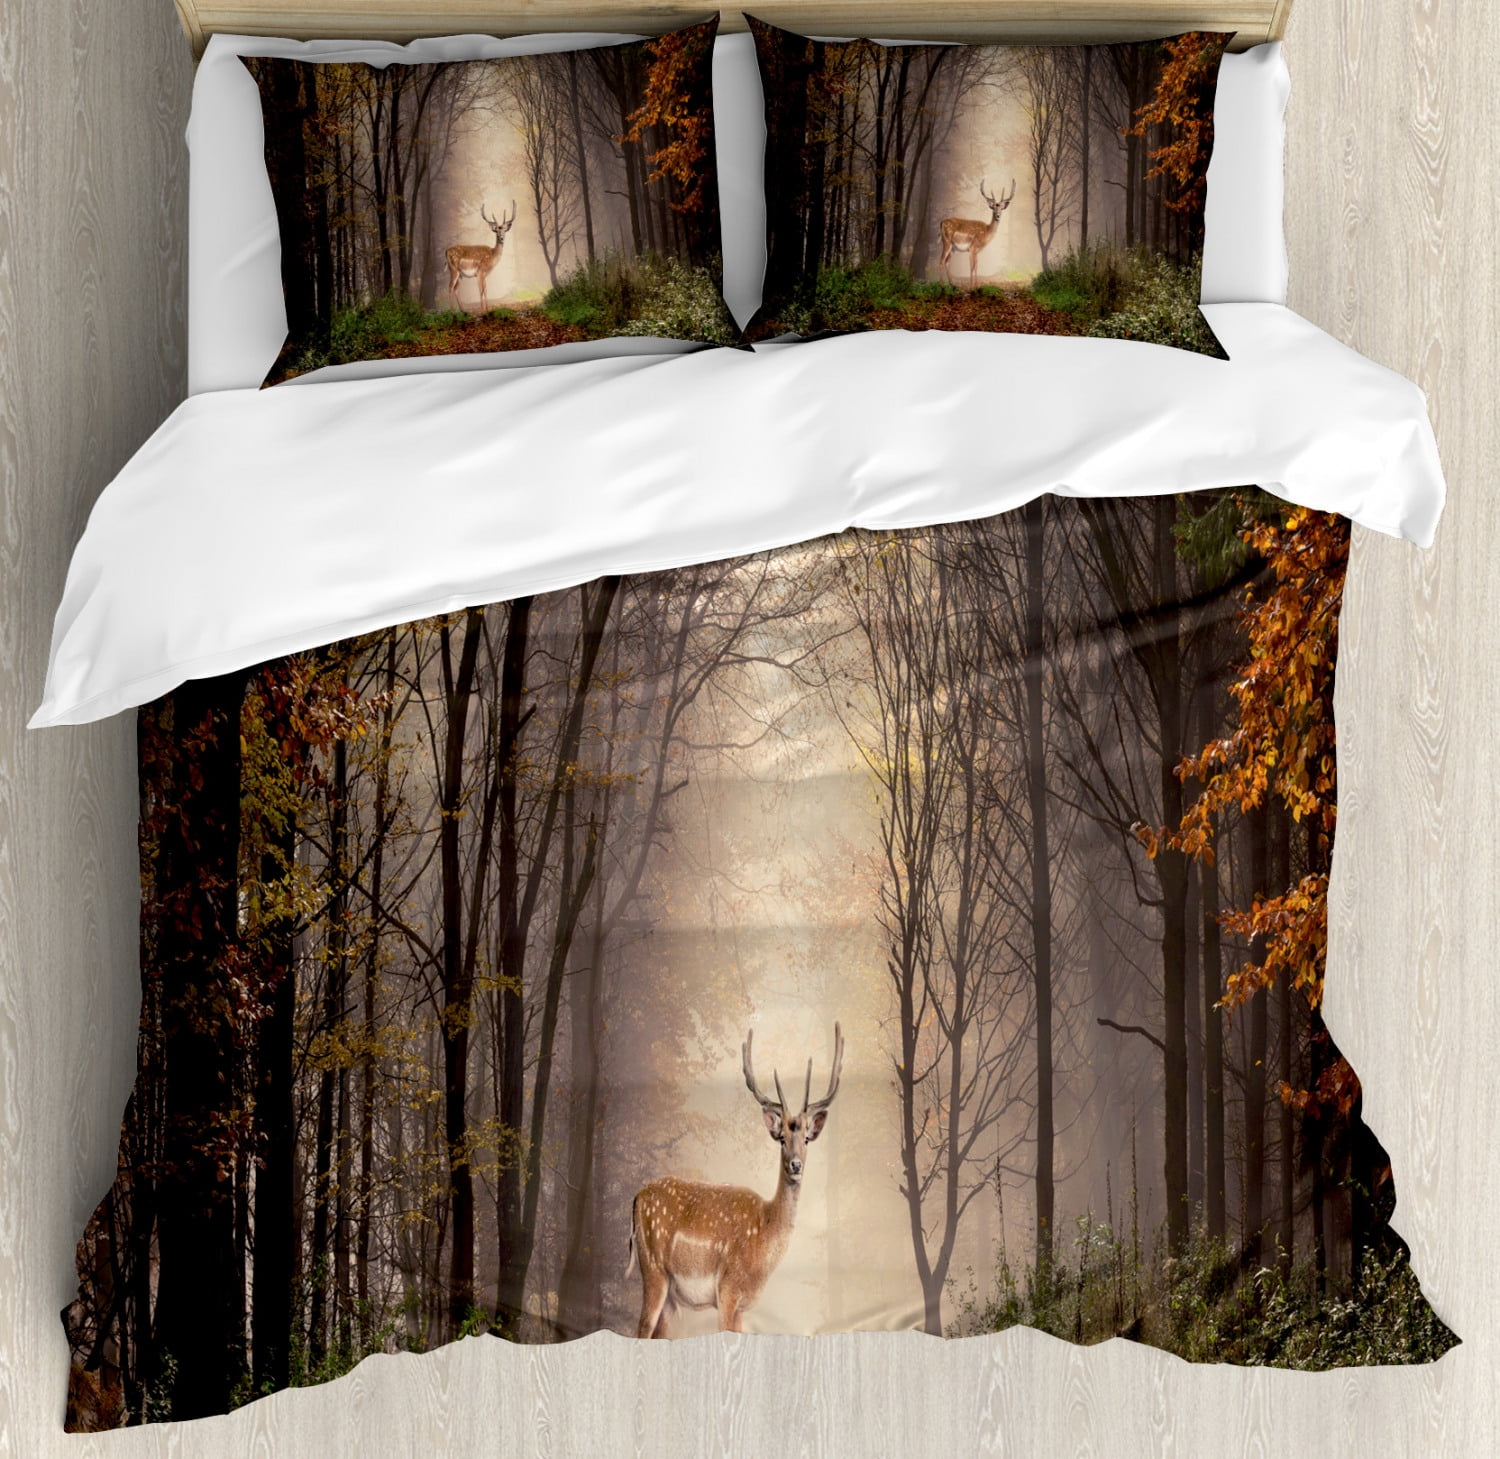 Wildlife King Size Duvet Cover Set, Stag Deer Discovers a Dreamy Misty ...